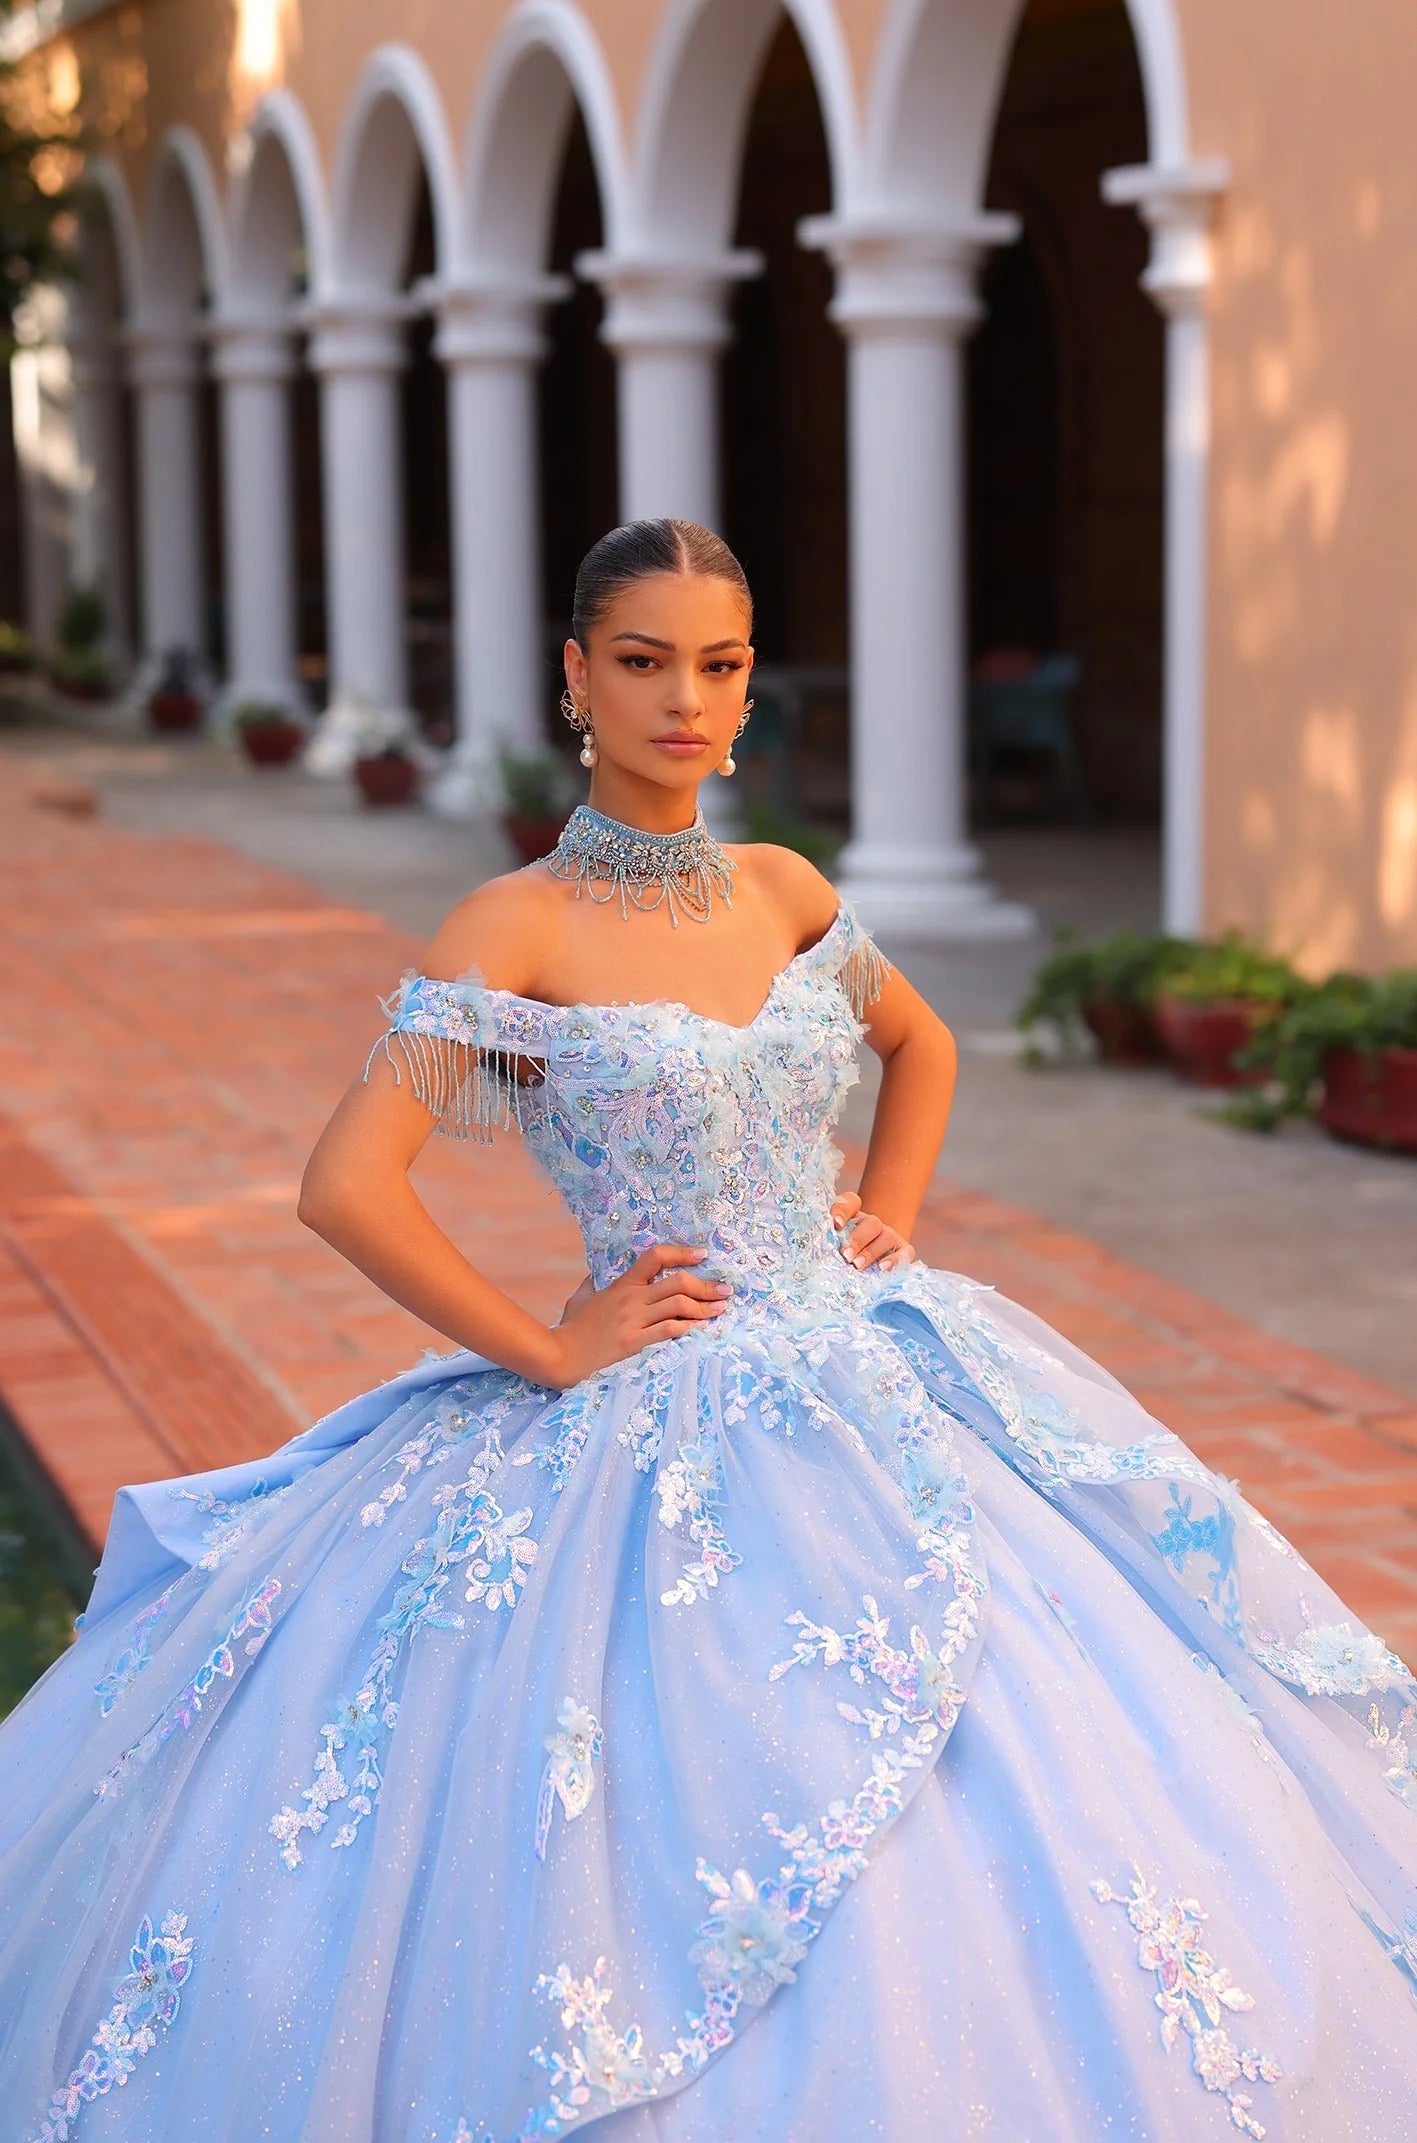 Effortlessly radiant and elegant, the Amarra 54305 quinceanera dress showcases a shimmering ballgown design with an off the shoulder fringe cape and intricately beaded sequin details. The layered lace skirt adds a touch of glamour to this stunning dress, ensuring you will stand out at any special occasion. Cinderella